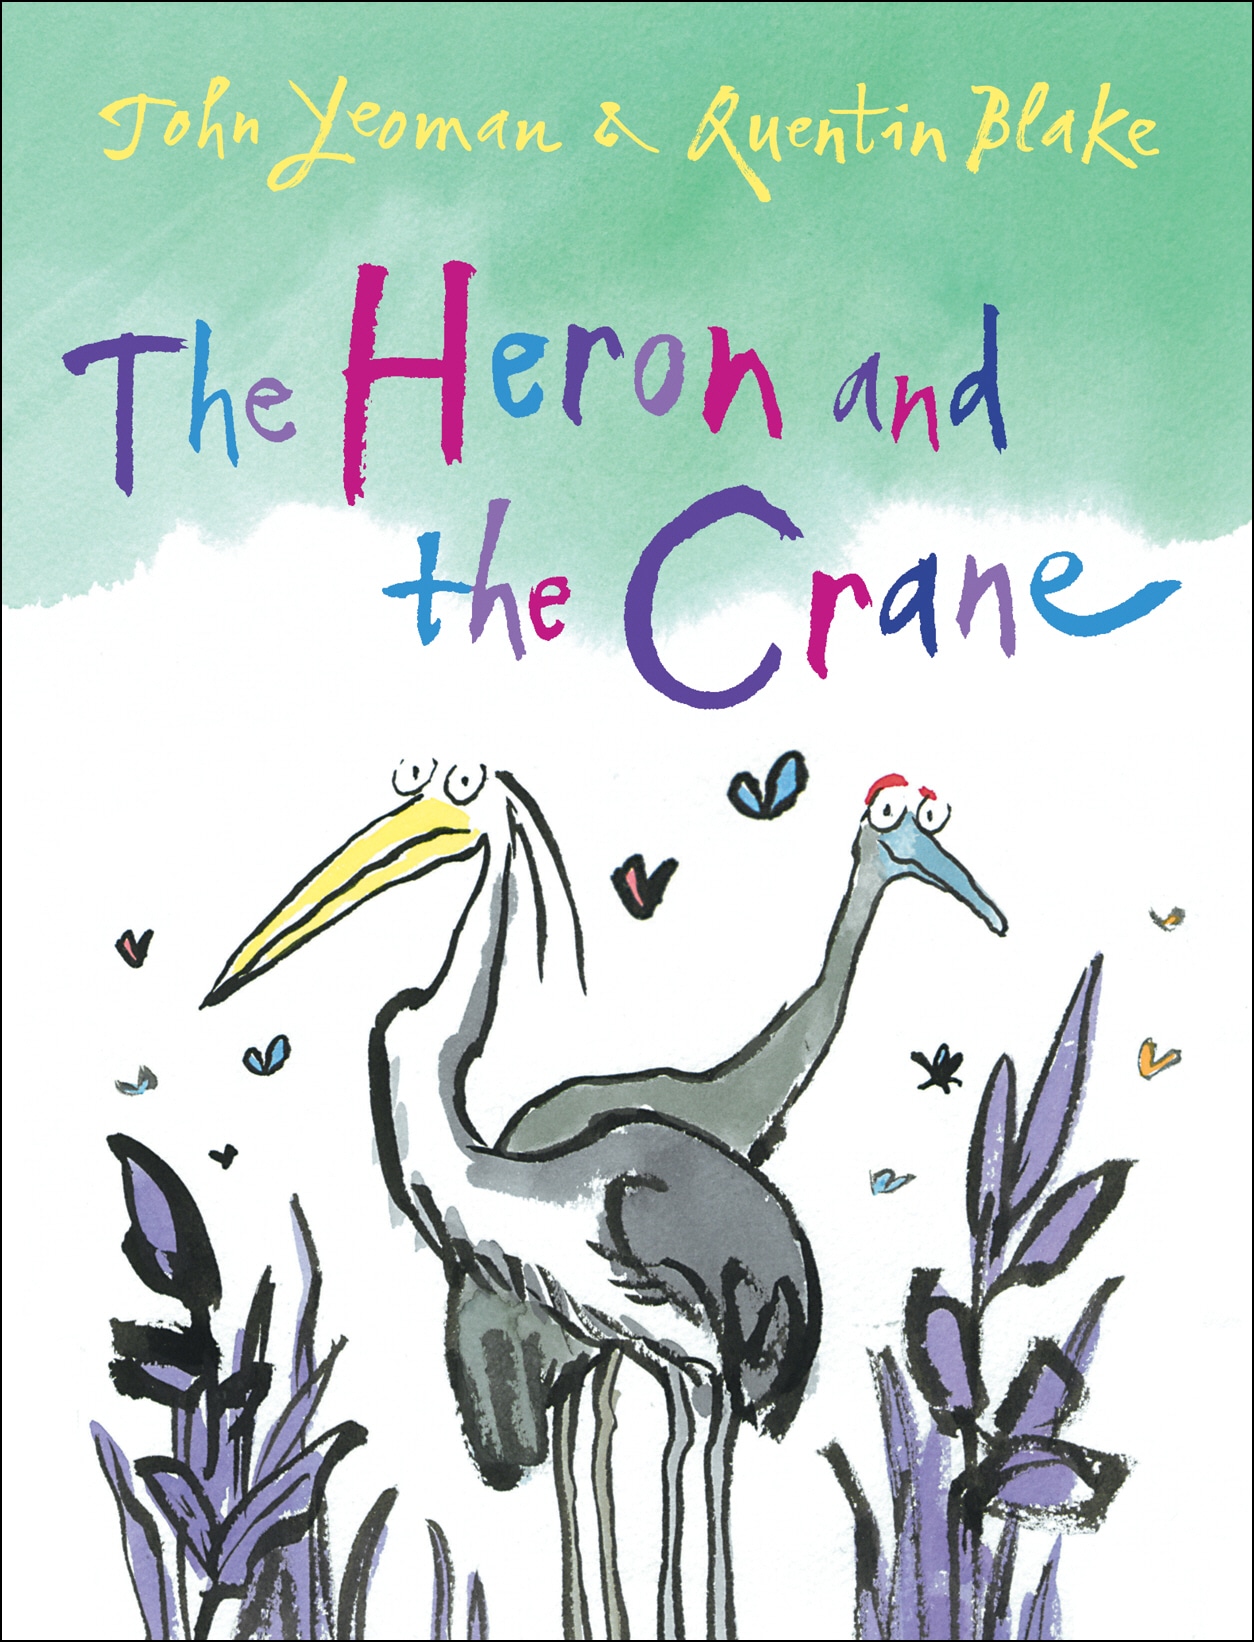 Book “The Heron and the Crane” by John Yeoman, Quentin Blake — February 3, 2011